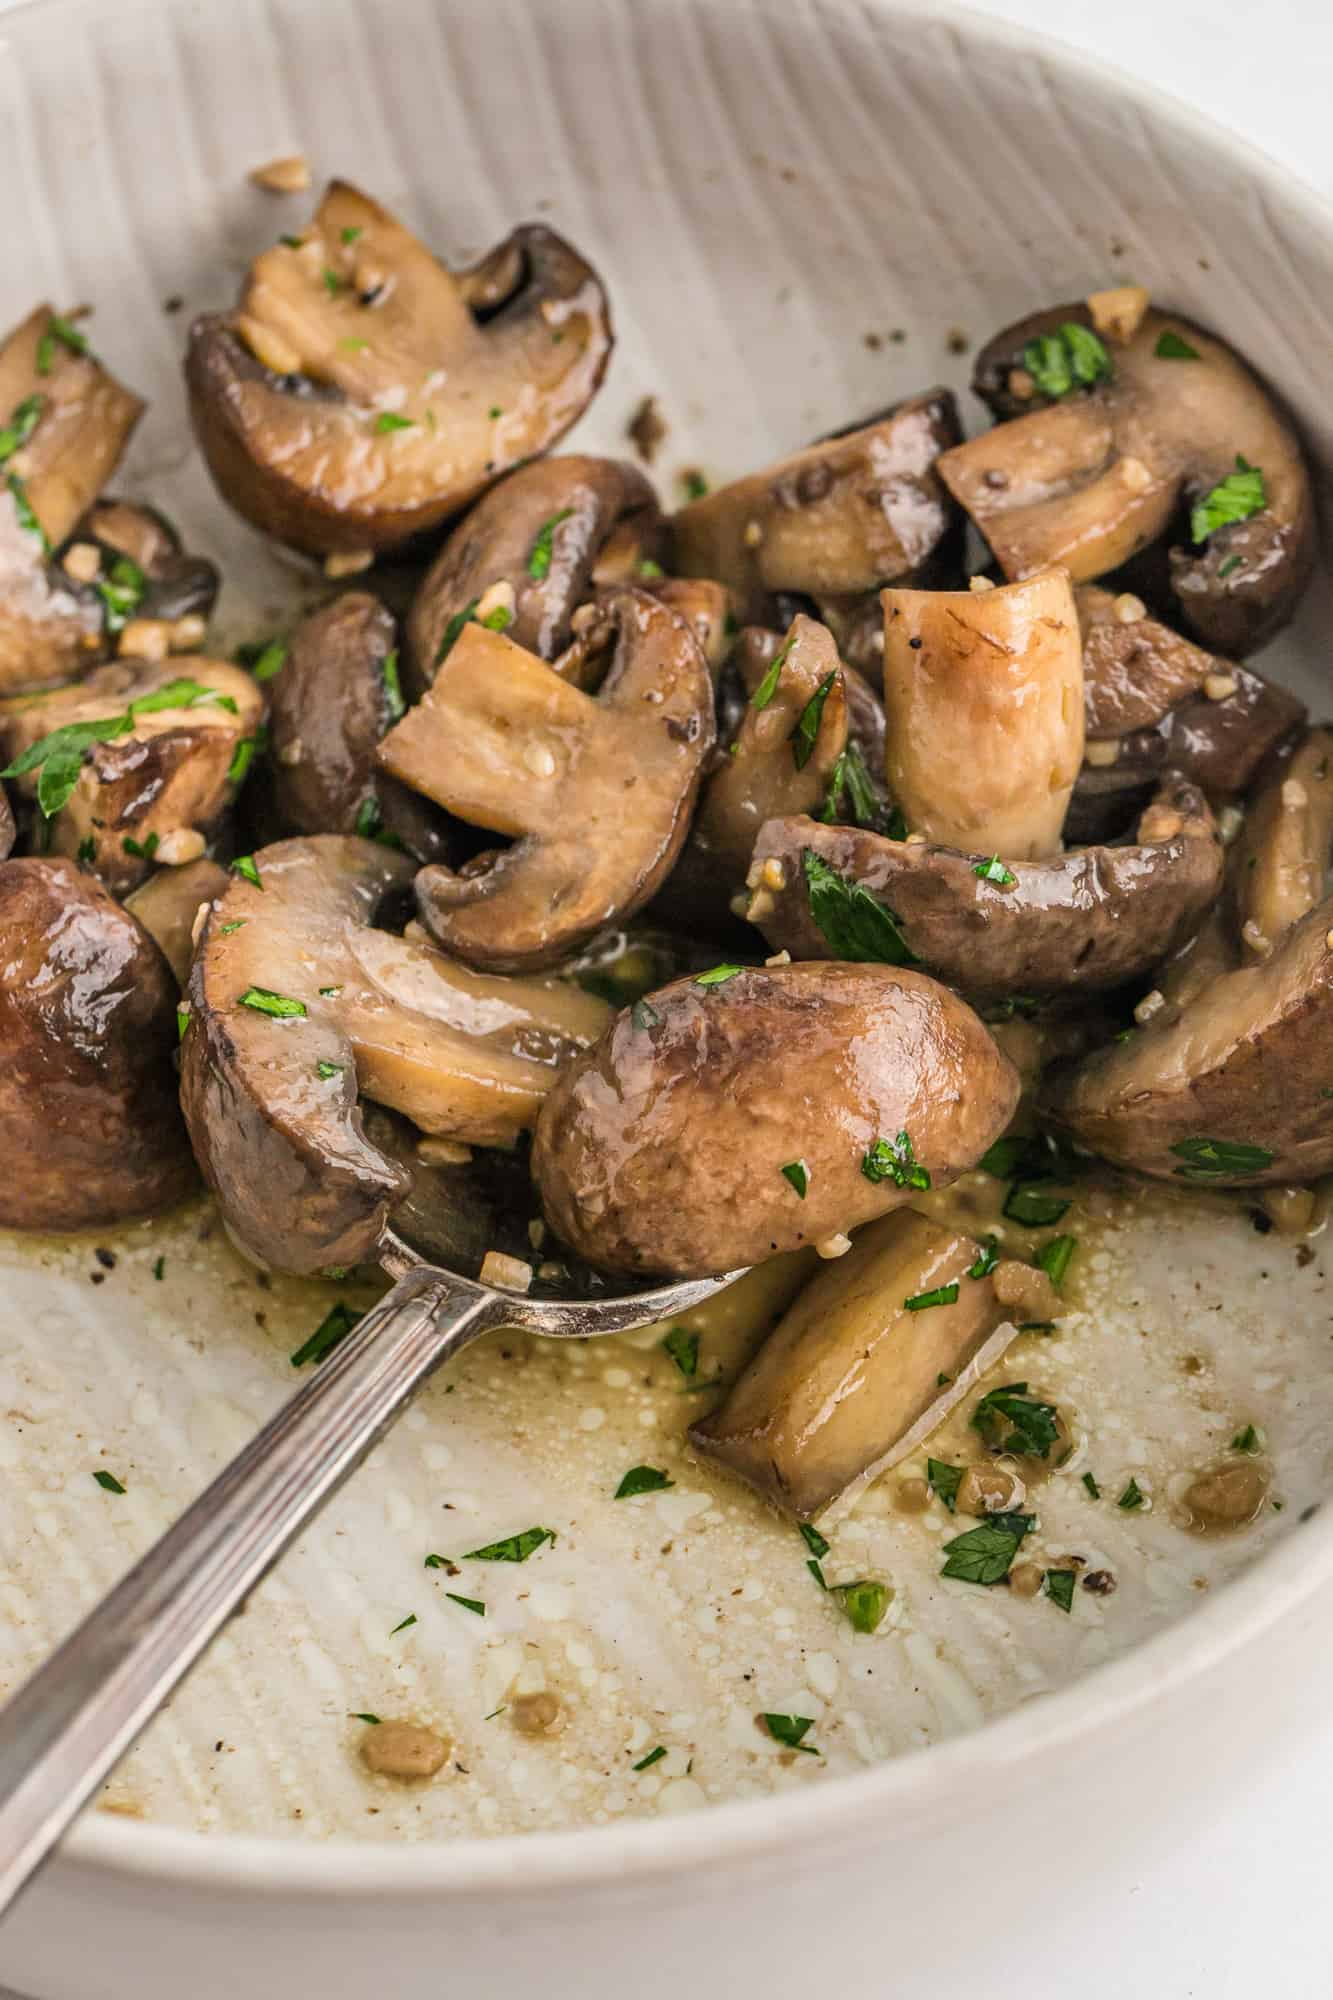 Mushrooms in a bowl with garlic butter and parsley.